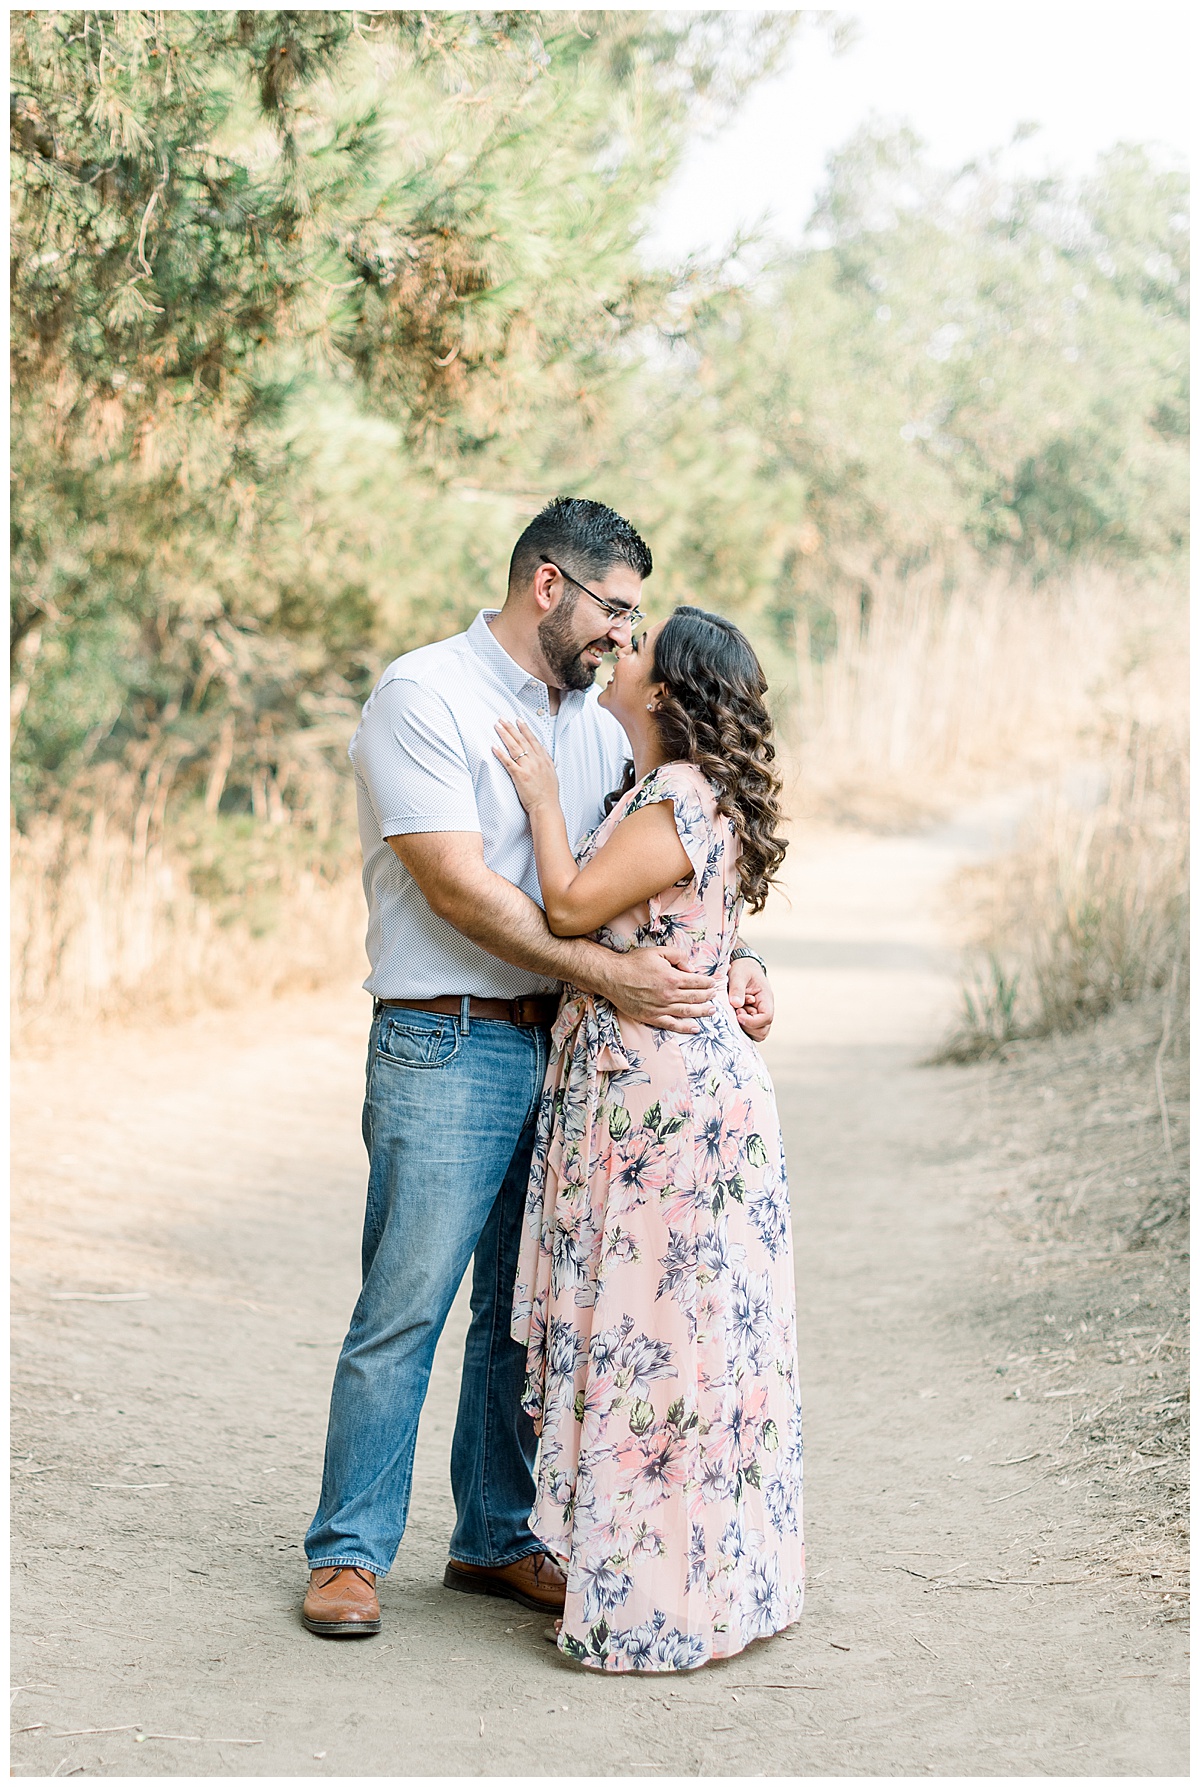 Engaged couple at Arroyo Verde Park